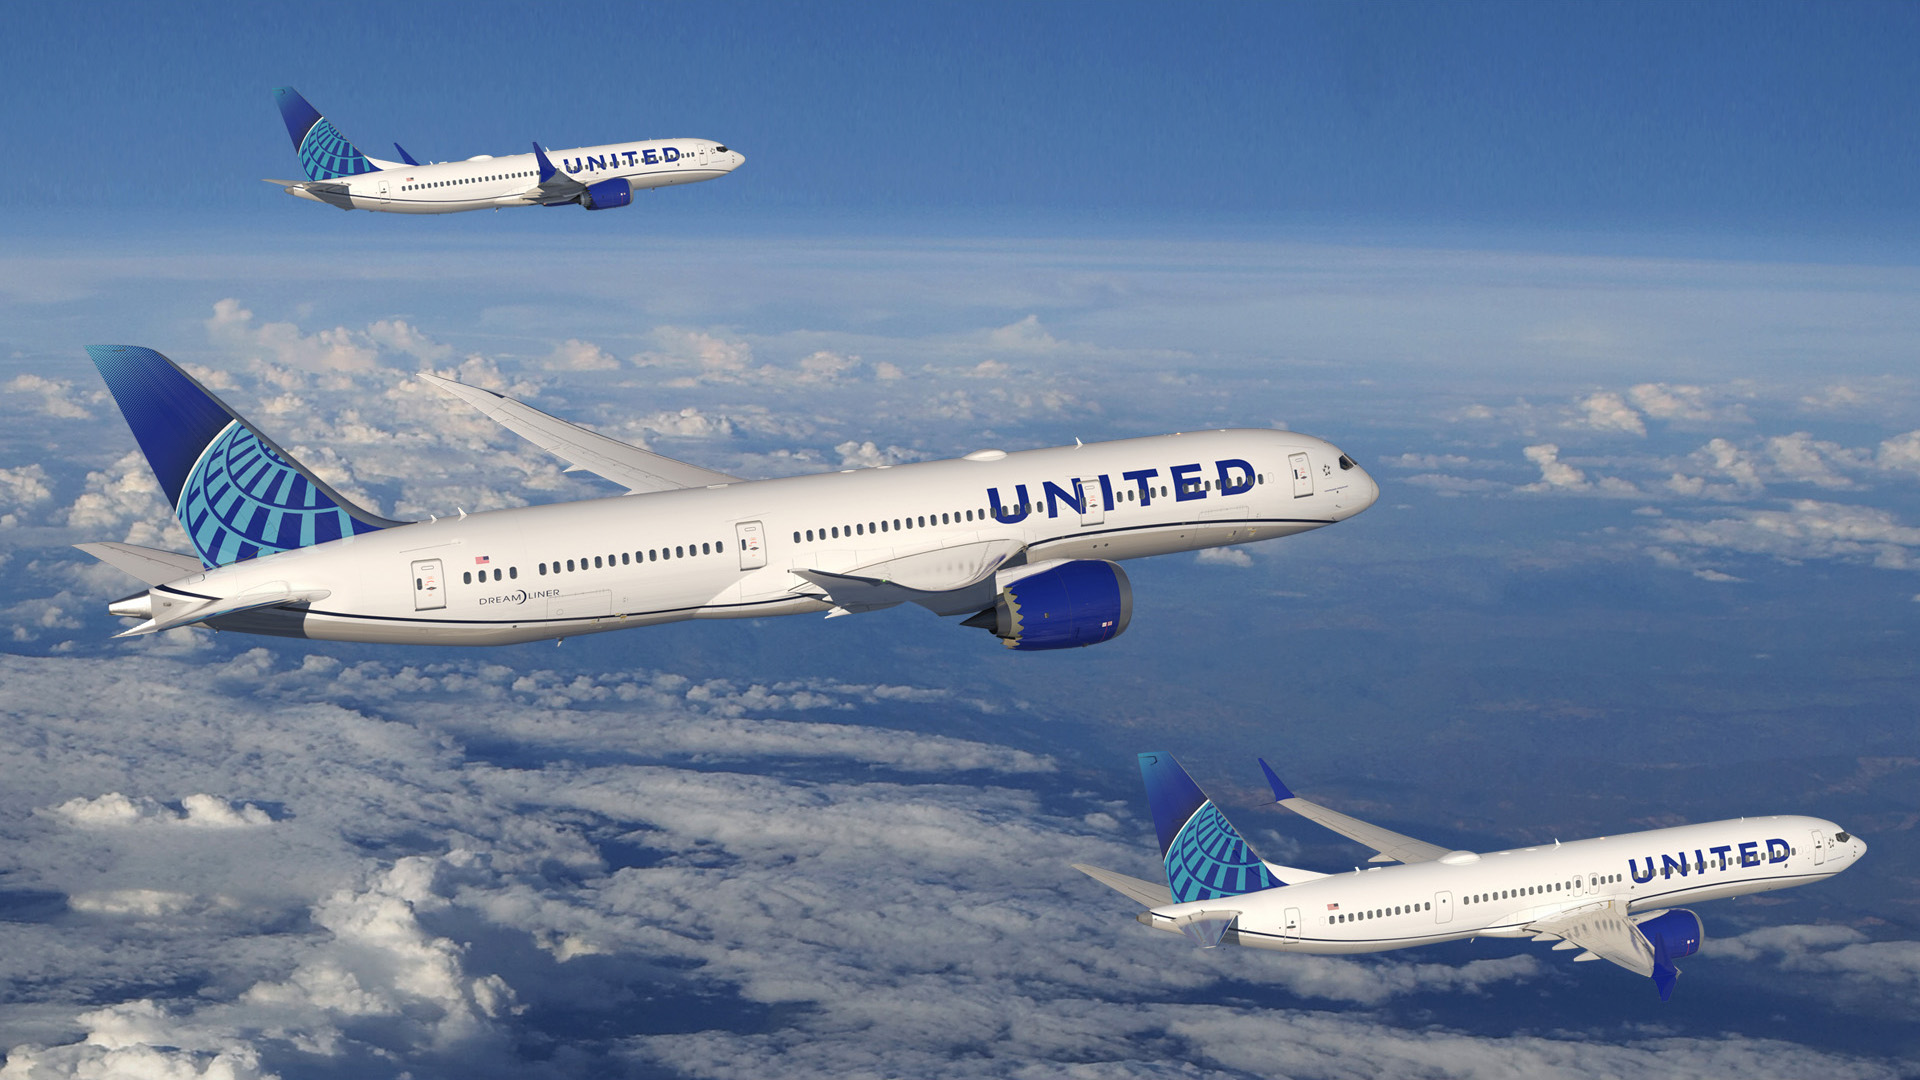 United Airlines has Ordered Up to 200 New Boeing 787 Dreamliners and 100 Additional 737 MAX Aircraft.